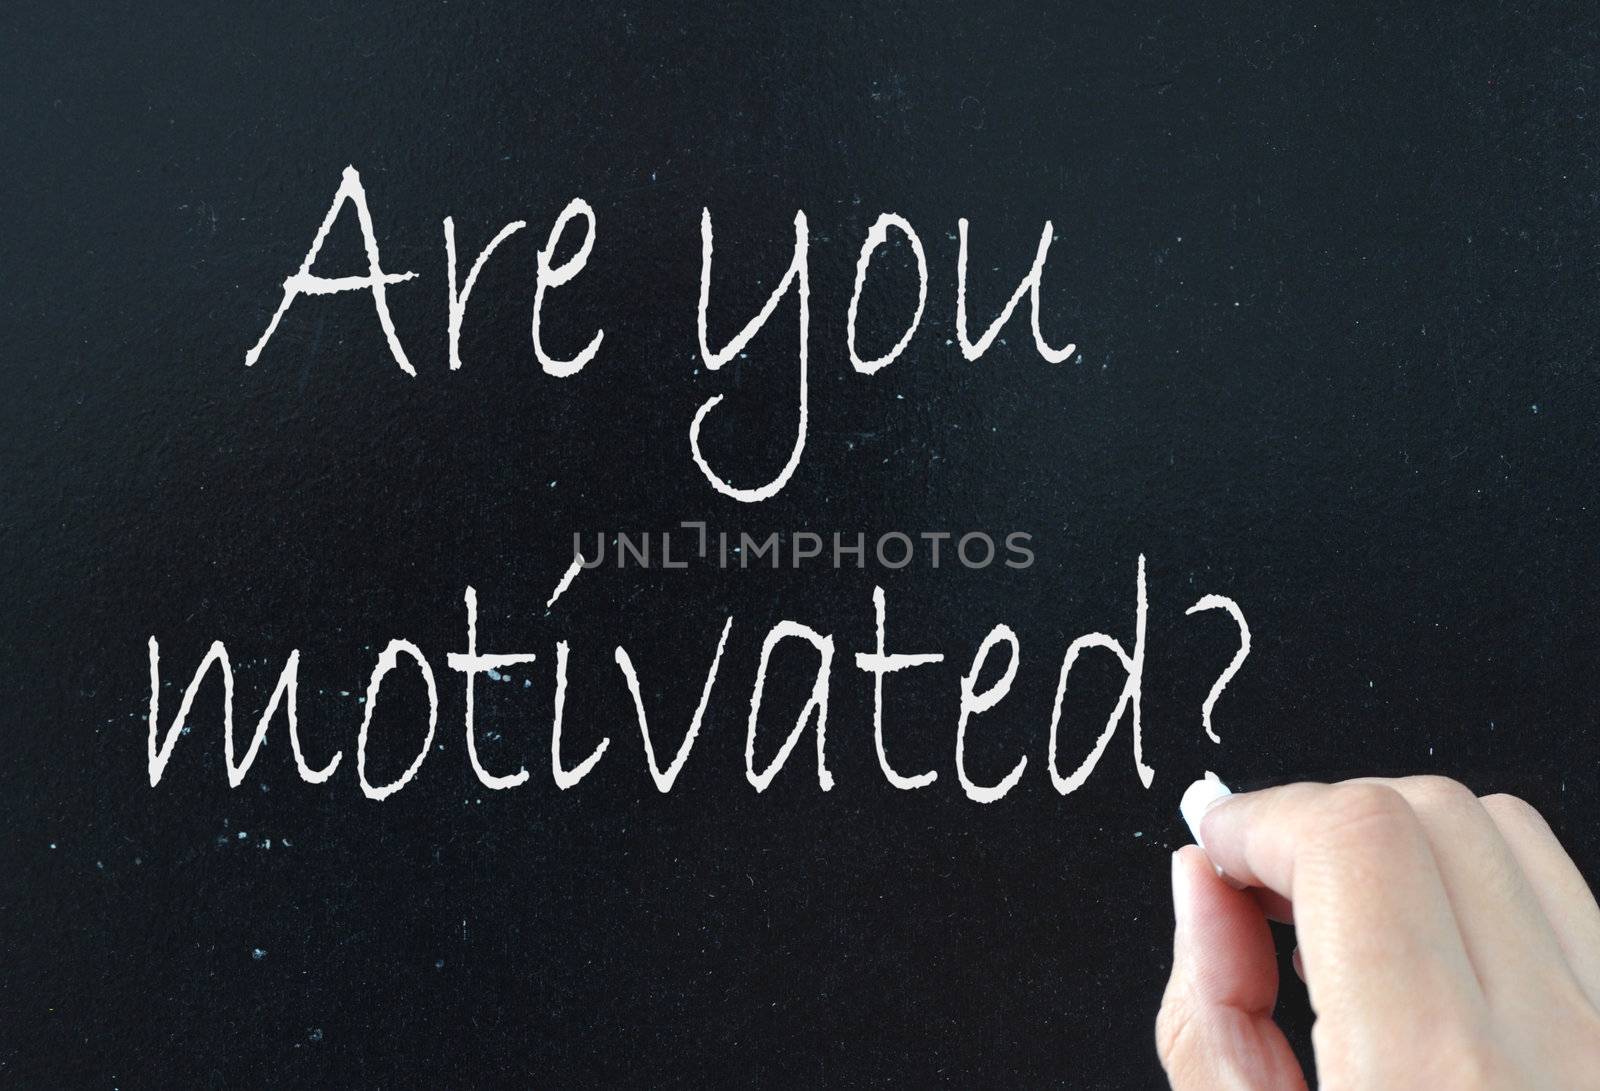 Are you motivated handwritten on a blackboard